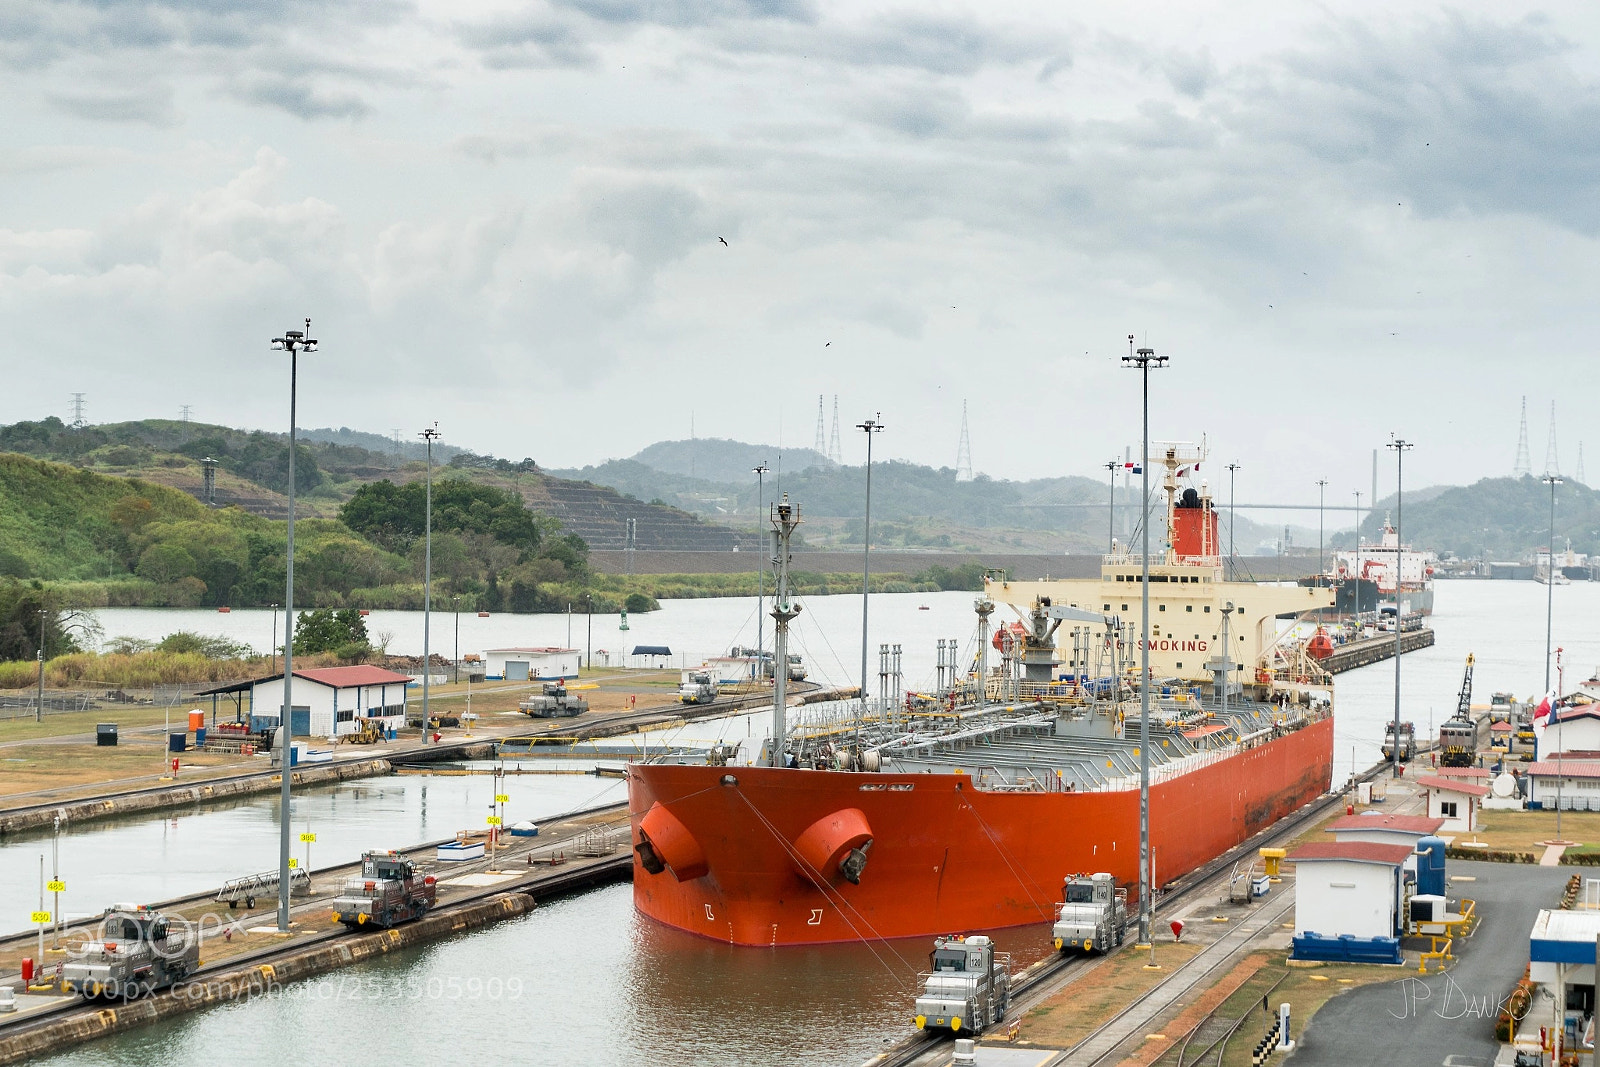 Sony a6300 sample photo. The panama canal miraflores photography